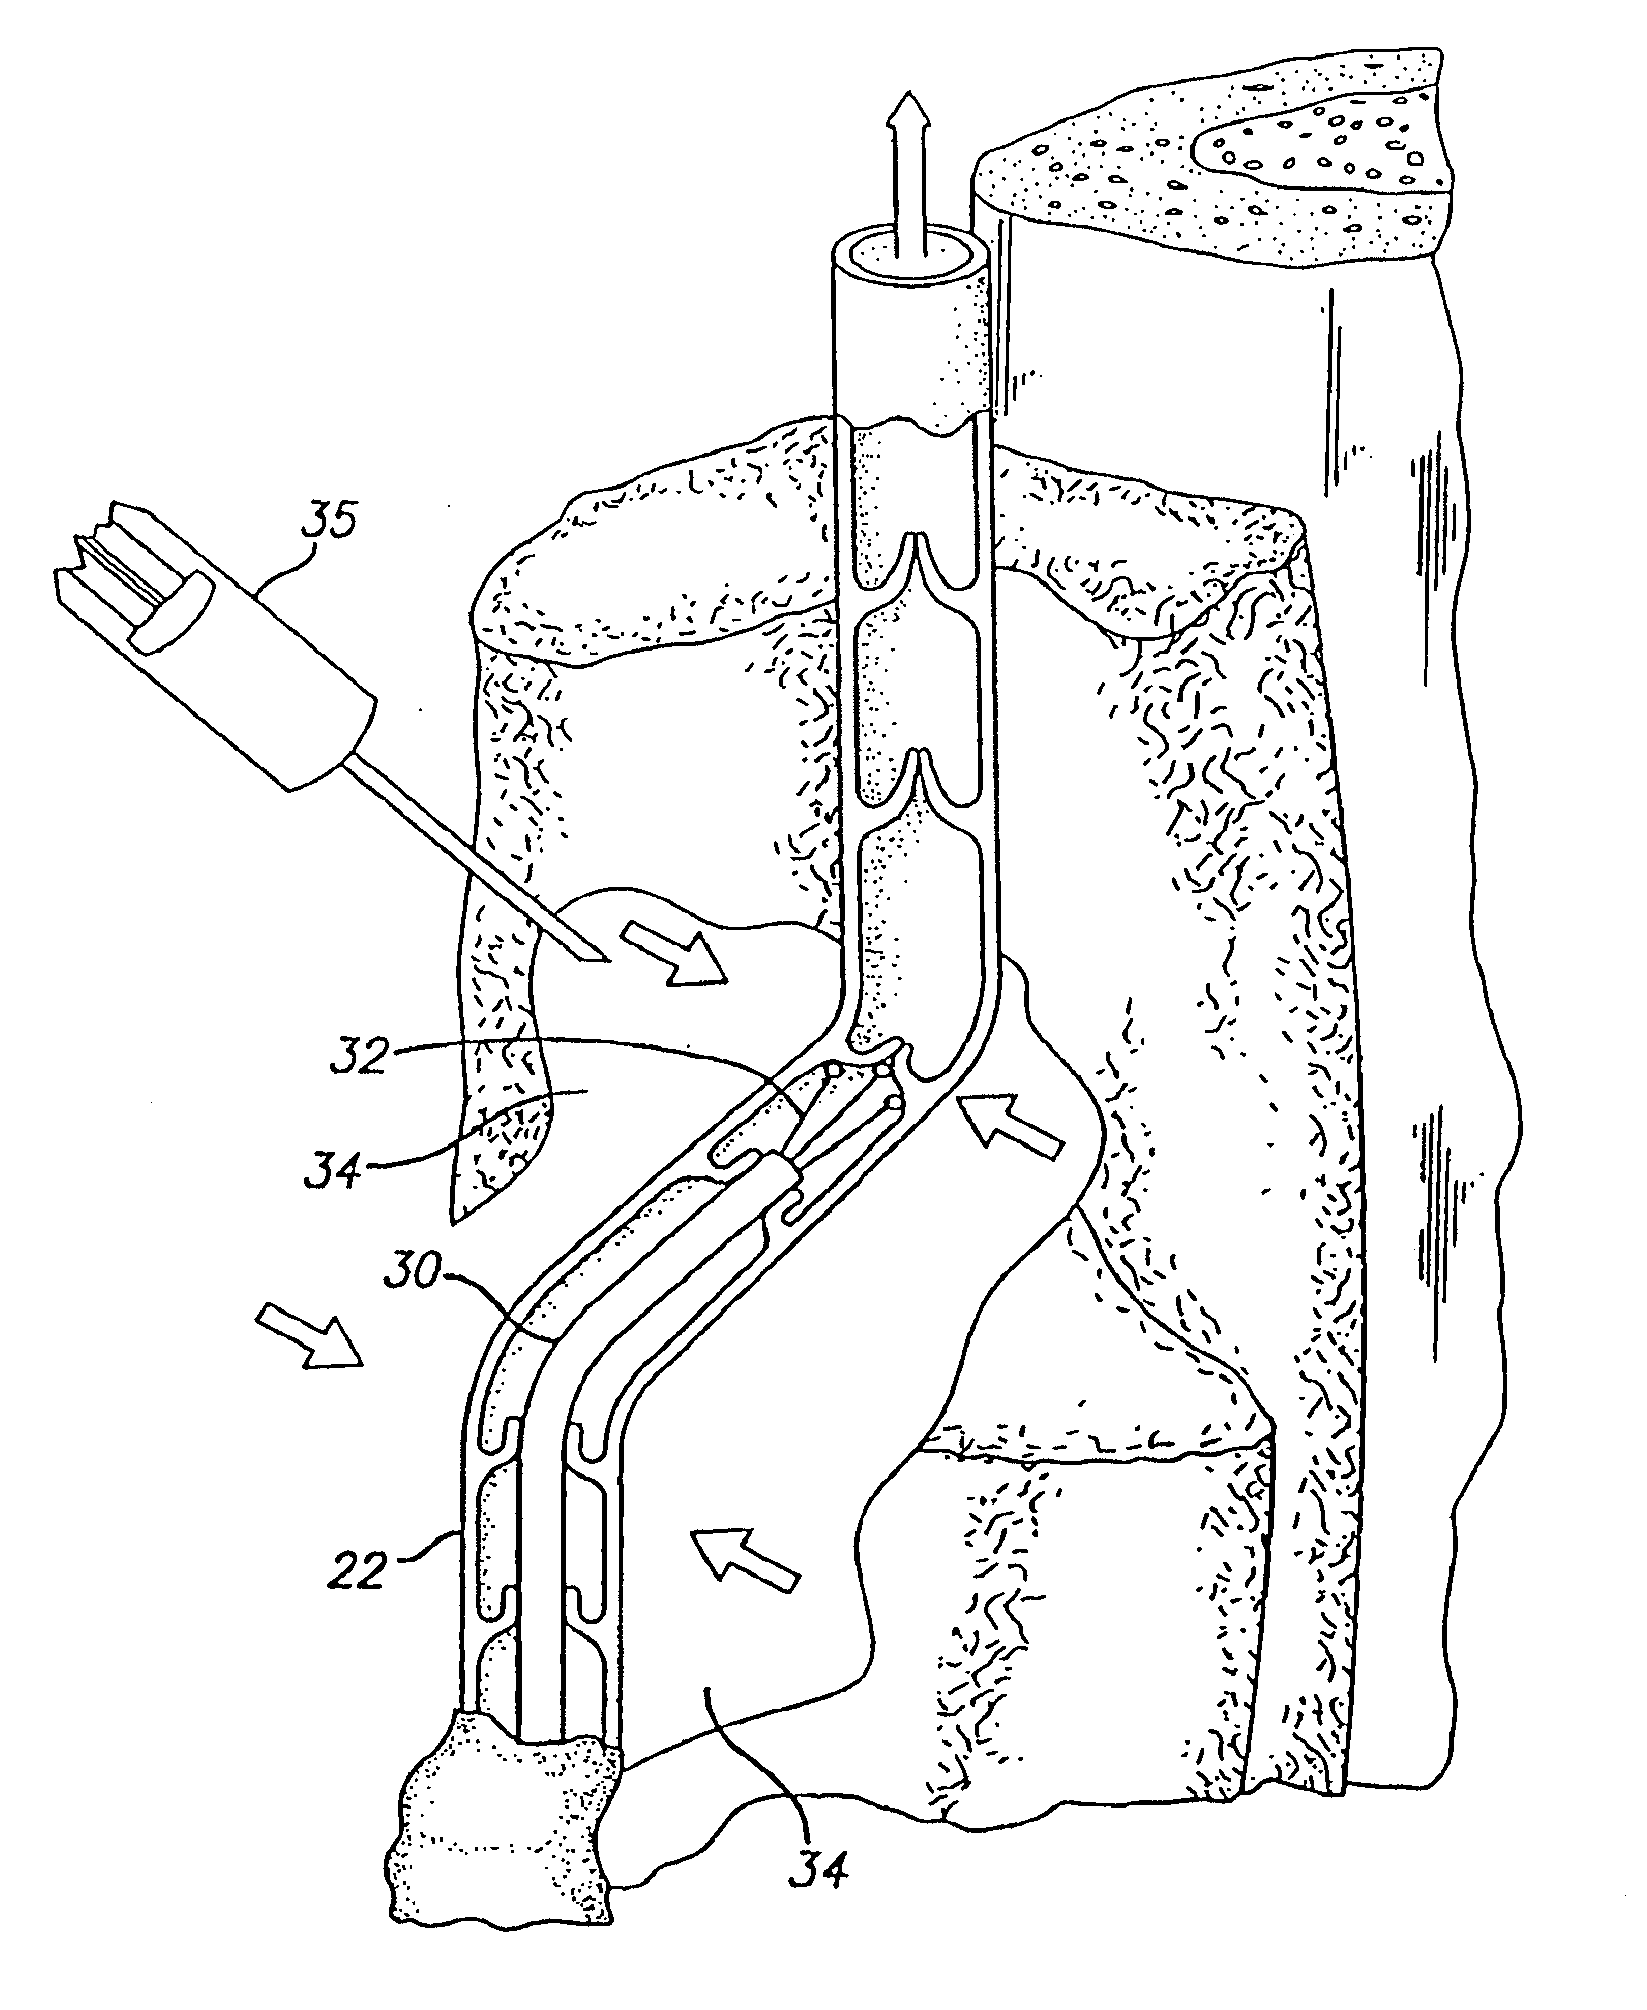 Method and apparatus for applying energy to biological tissue including the use of tumescent tissue compression